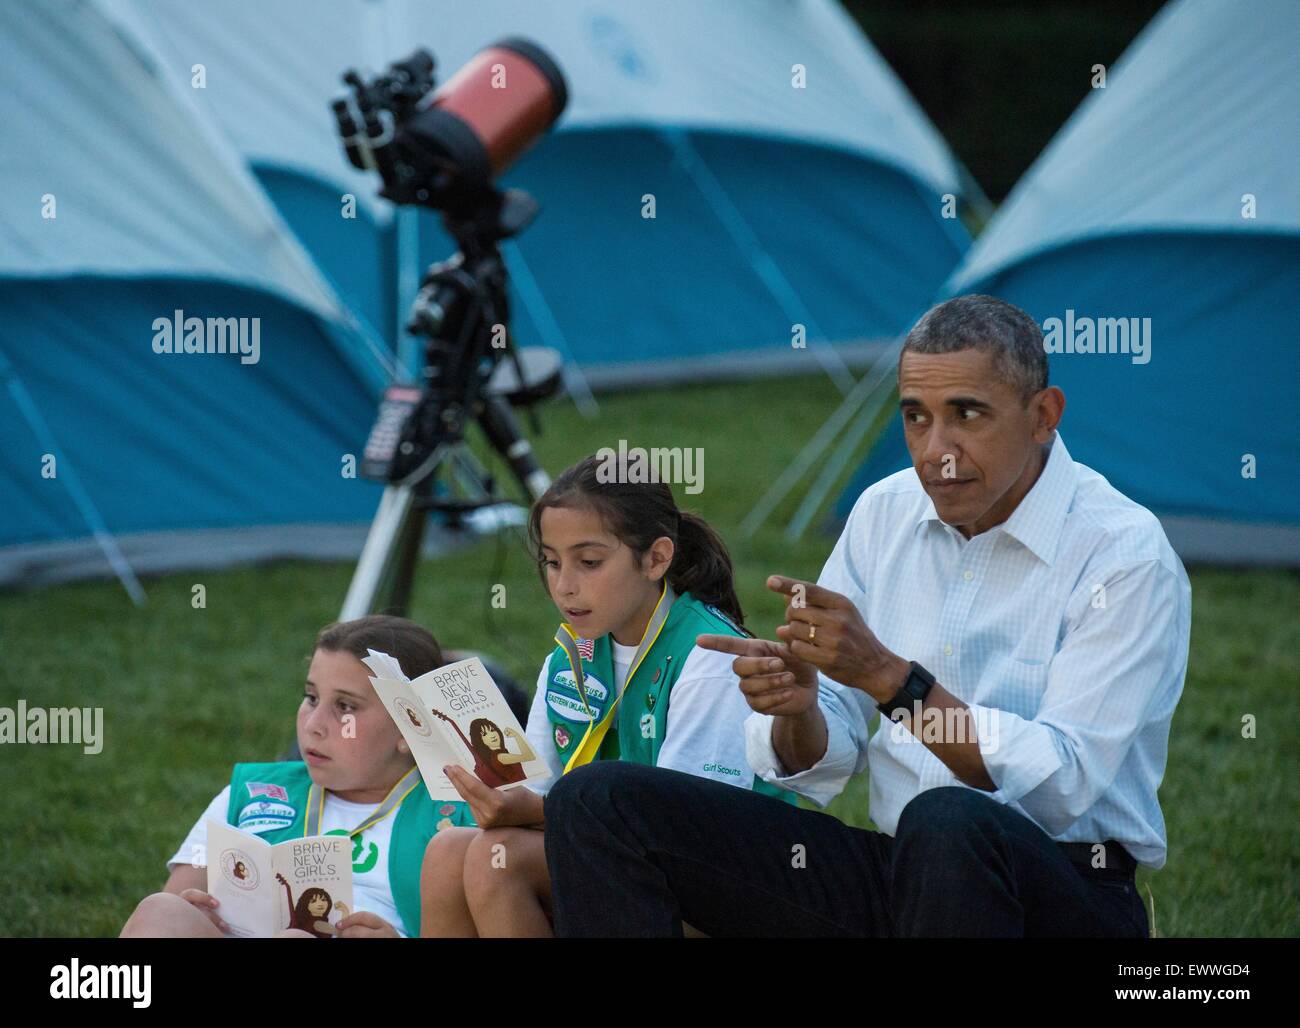 U.S. President Barack Obama jokes with Girl Scouts during the first-ever White House Campout with fifty fourth-grade girls as part of the Let's Move! Outside initiative on the South Lawn of the White House June 30, 2015 in Washington, DC. In addition to the campout the girls enjoyed stargazing activity with scientists and astronaut Cady Coleman. Stock Photo